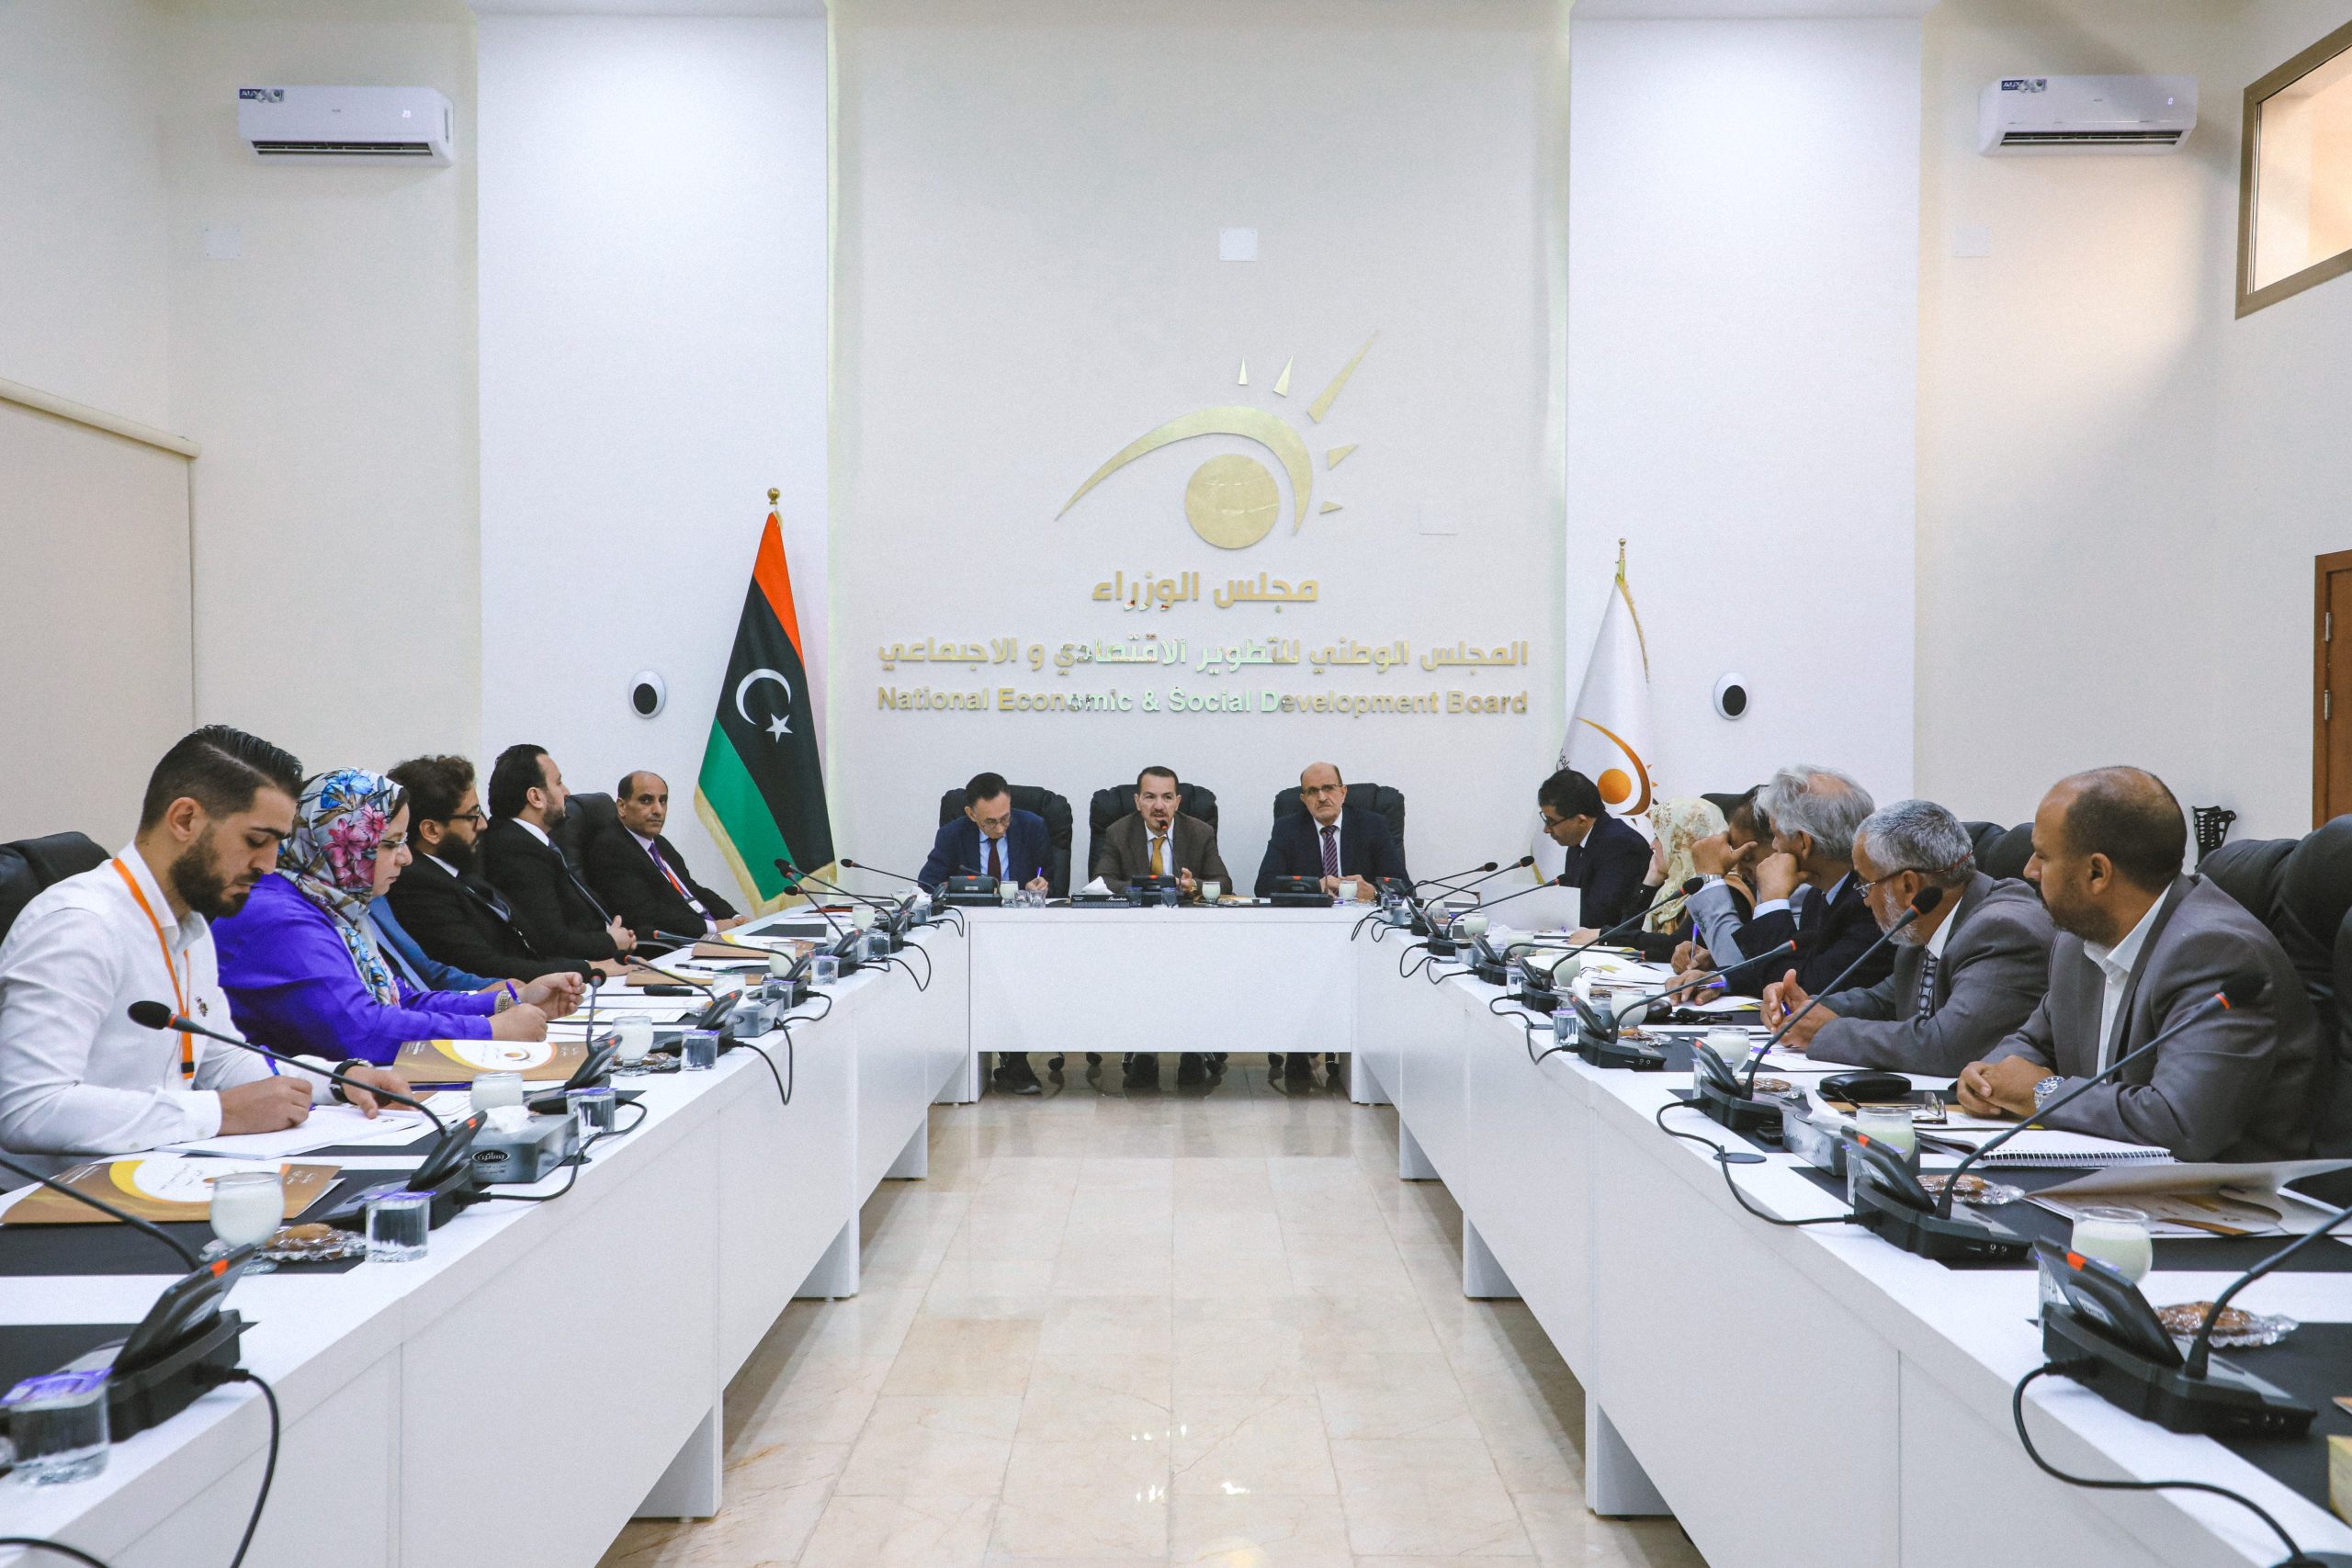 Libya the Future: A Clear National Vision that Brings Together Different Sectors of the State